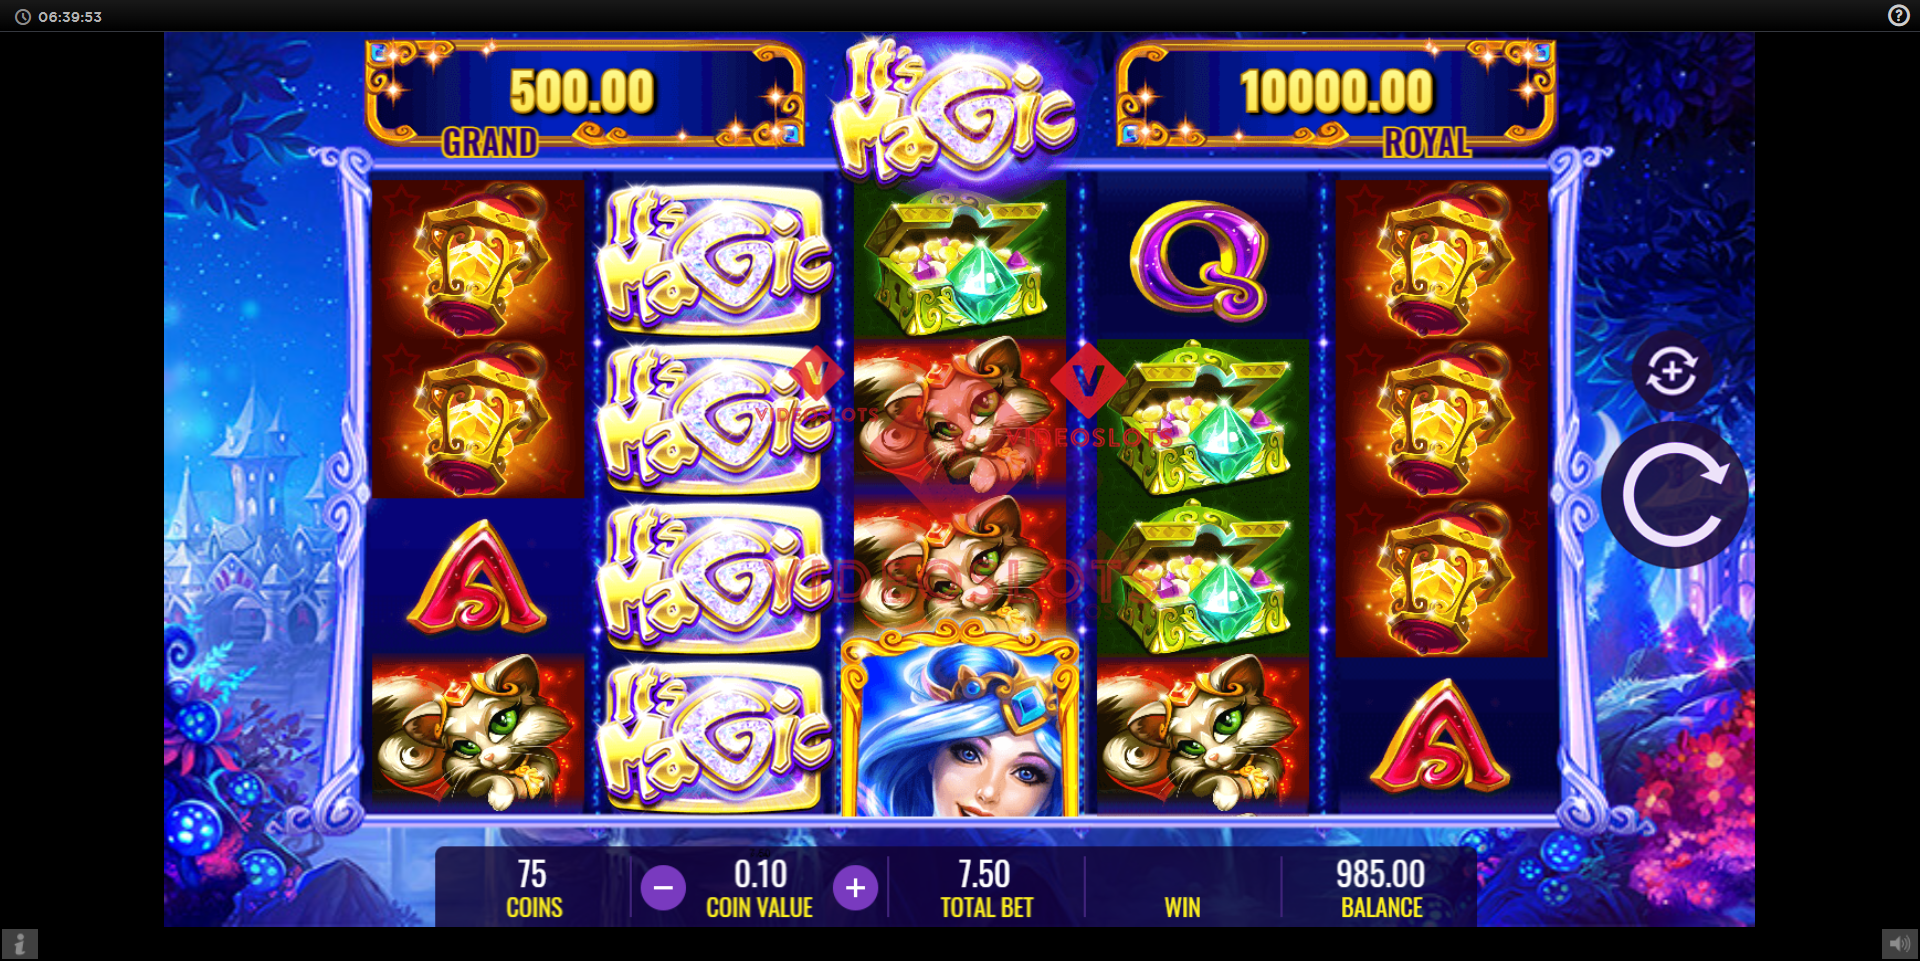 Base Game for It's Magic slot from IGT